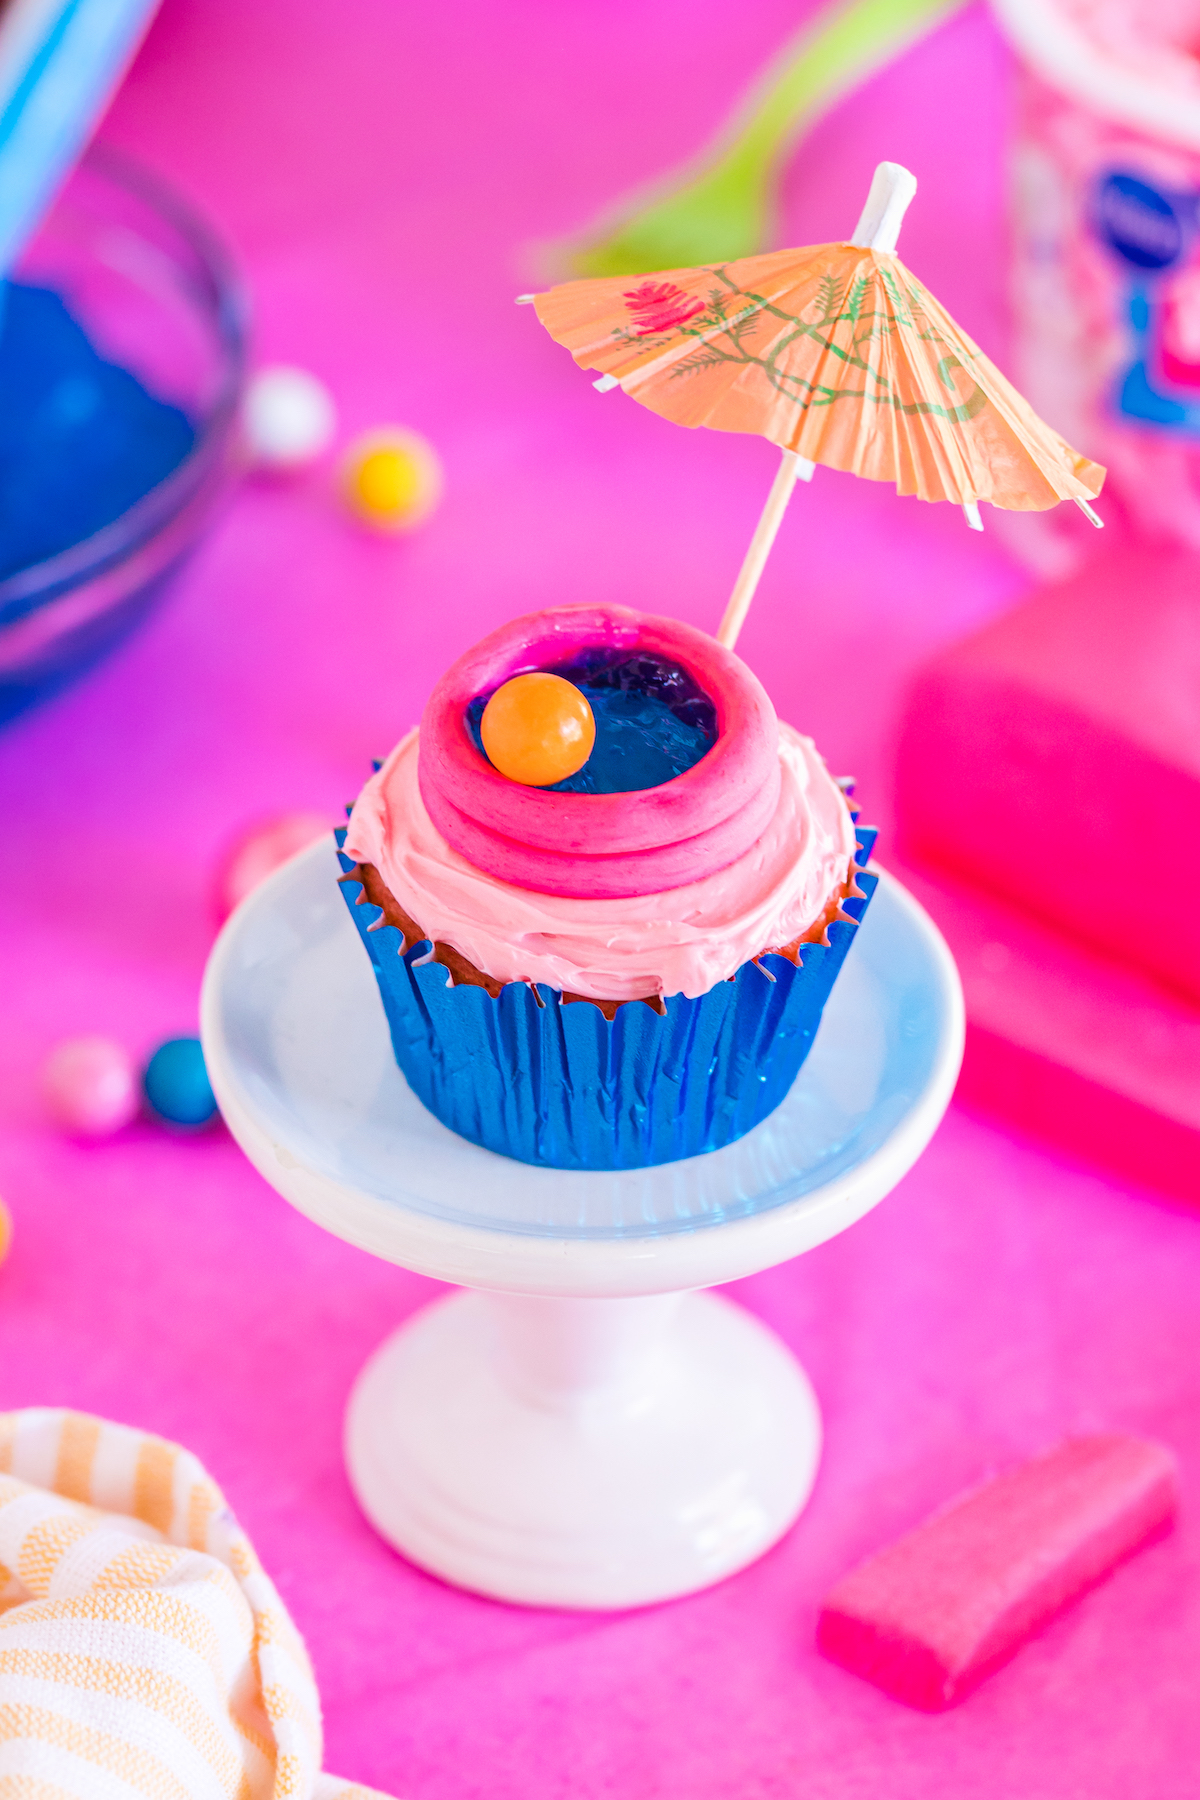 up close pool themed cupcake with cocktail umbrella and gum beach ball.